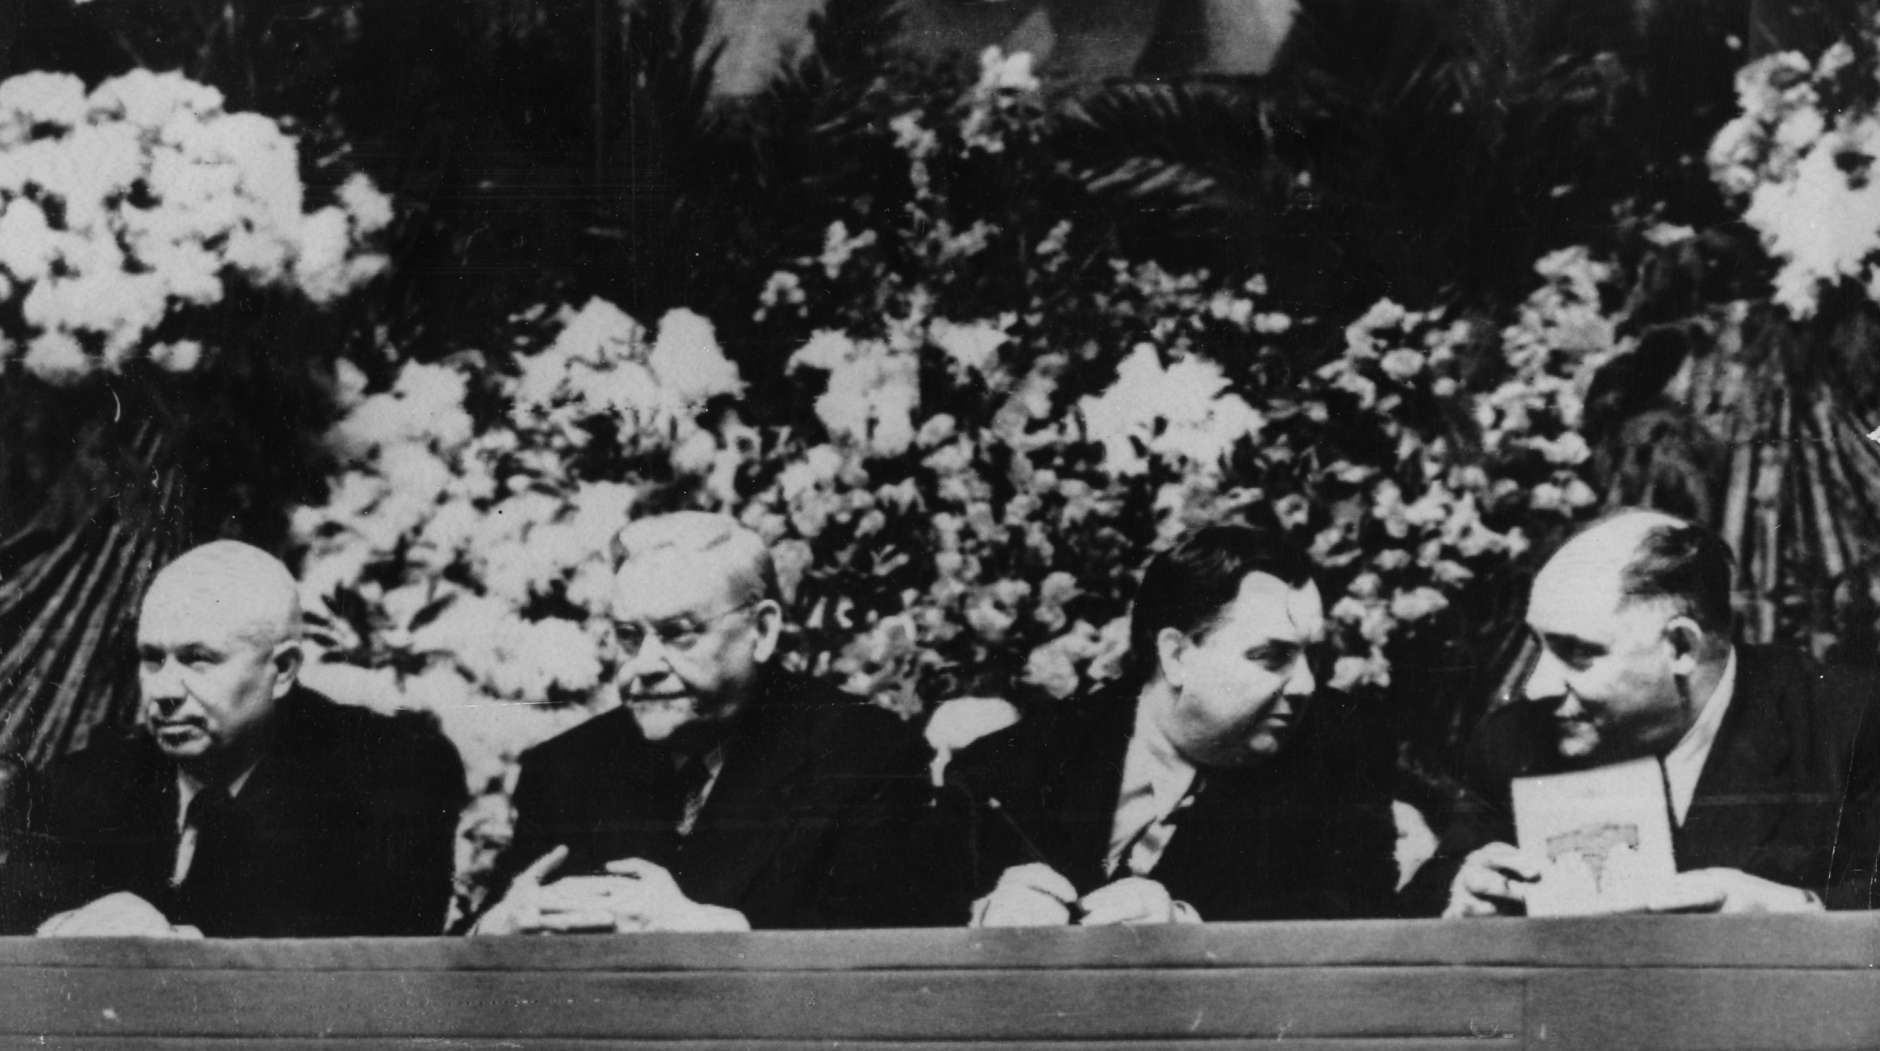 Soviet politicians Nikita Khrushchev, Nikolai Bulganin, Georgy Maximilianovich Malenkov and Lazar Kaganovitch, from left to right, show their presence framed by flowers at a construction workers mass demonstration in Moscow, Russia, February 4, 1957. (AP Photo)